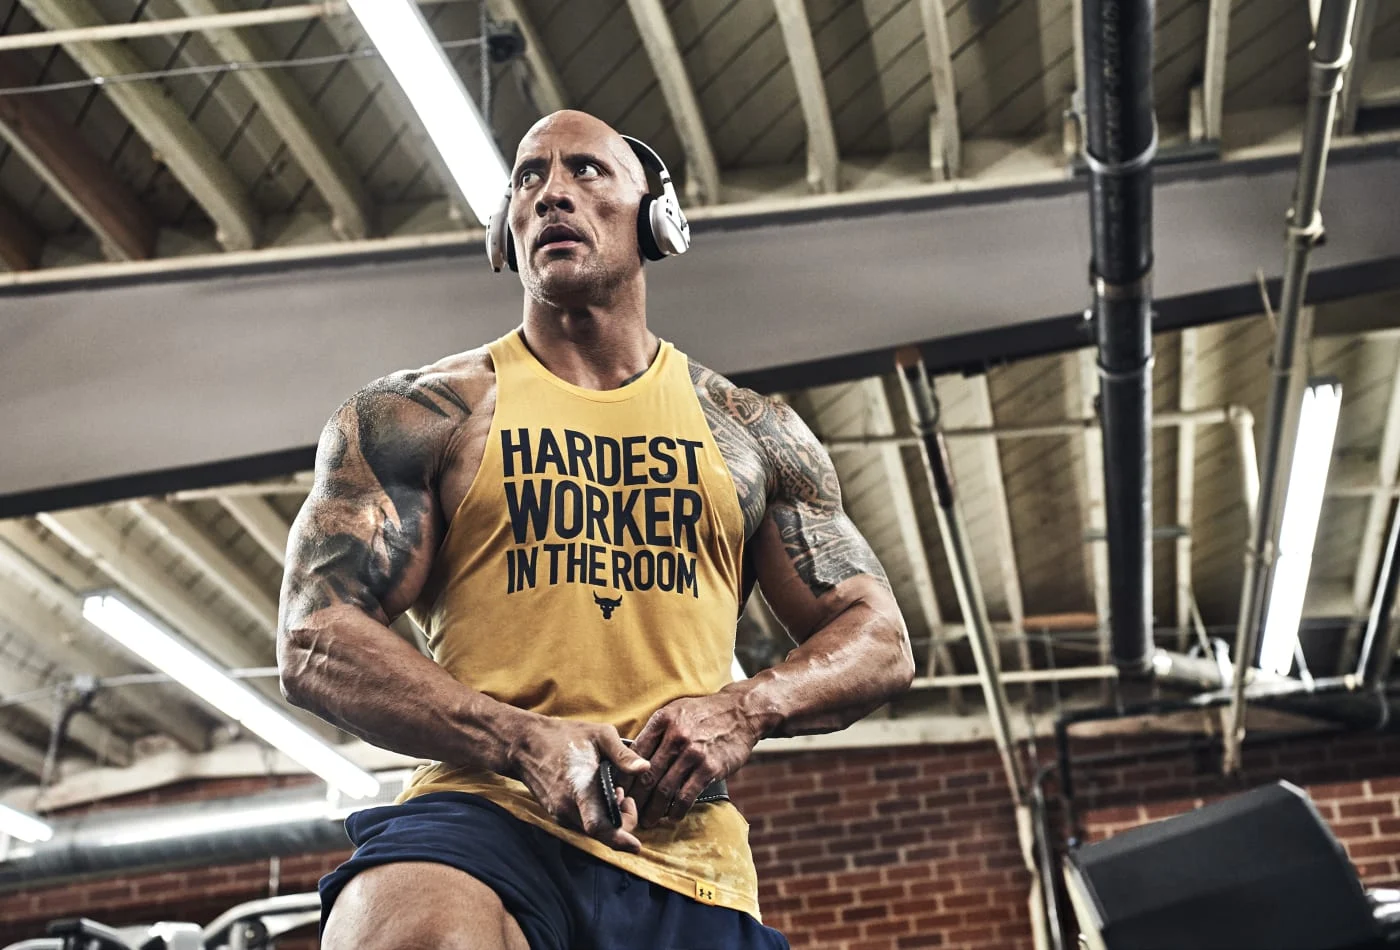 5 Things Dwayne Johnson Does to Maintain His Impressive Physical Appearance  at 50 Years of Age